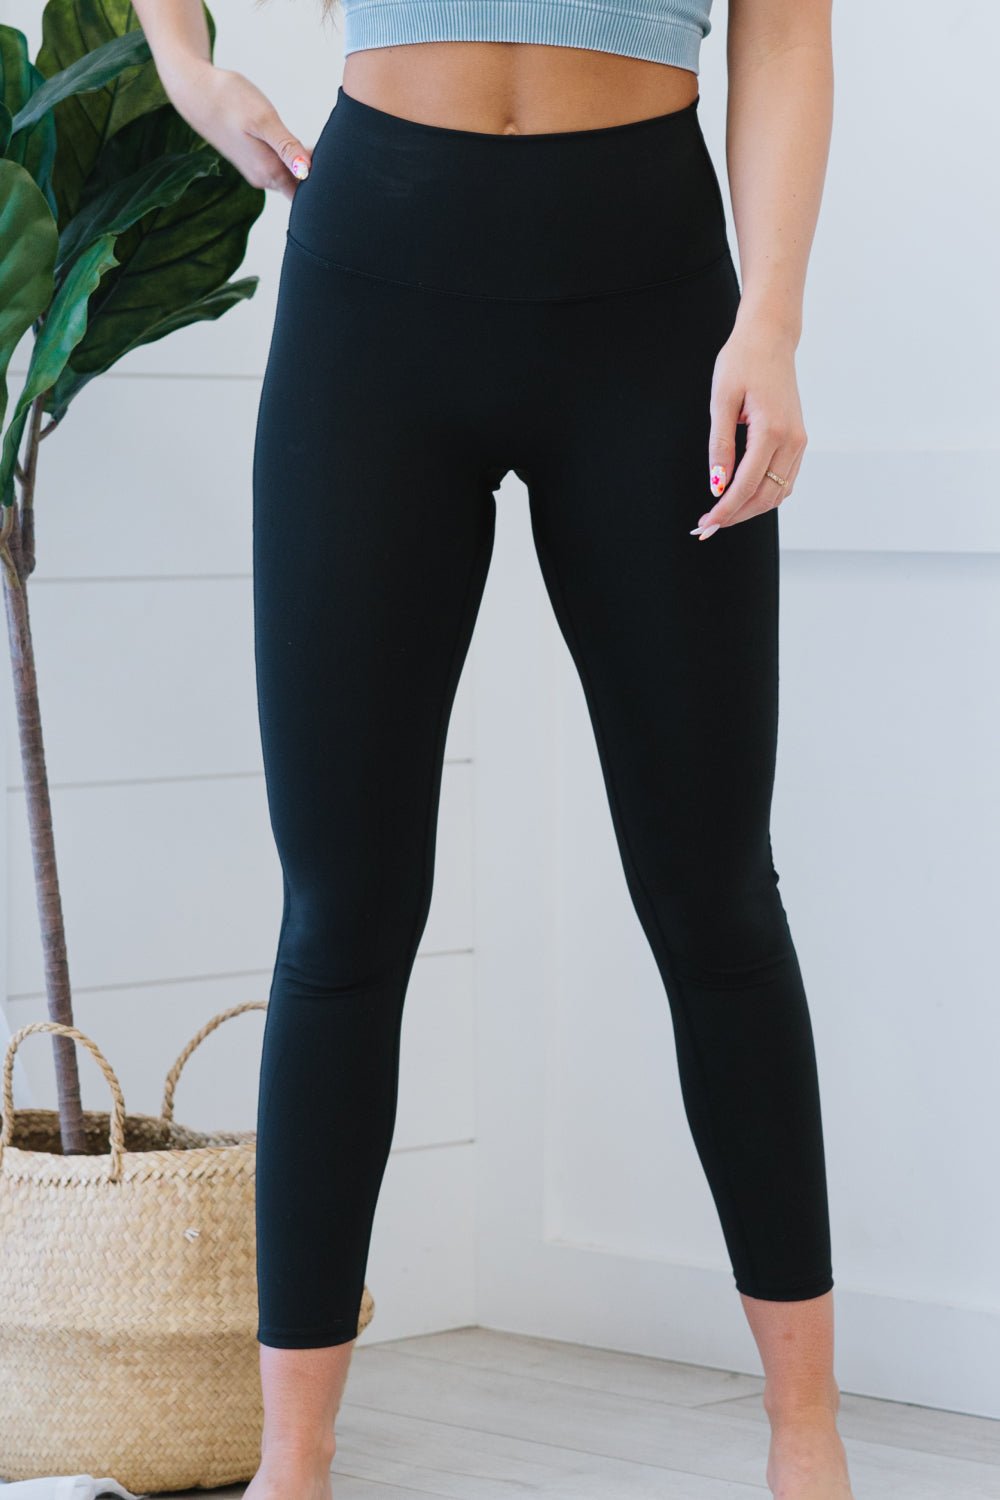 Zenana On Your Mark High Waisted Active Leggings in Black - Red Fox Boutique